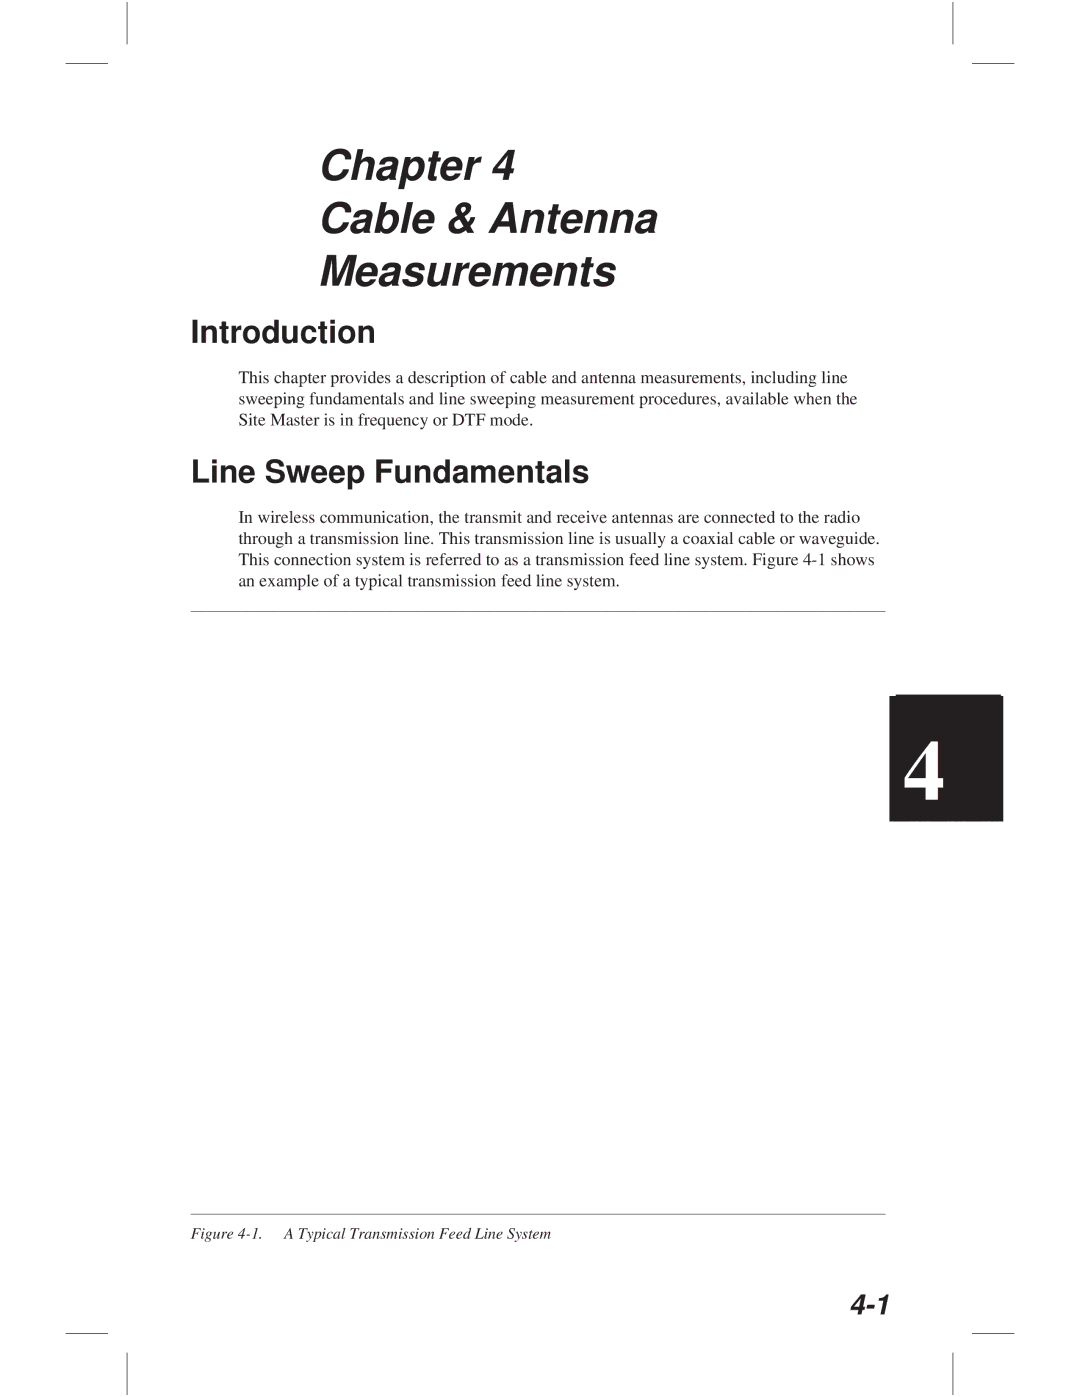 Anritsu S114C, S113C, S332C, S331C manual Chapter Cable & Antenna Measurements, Line Sweep Fundamentals 